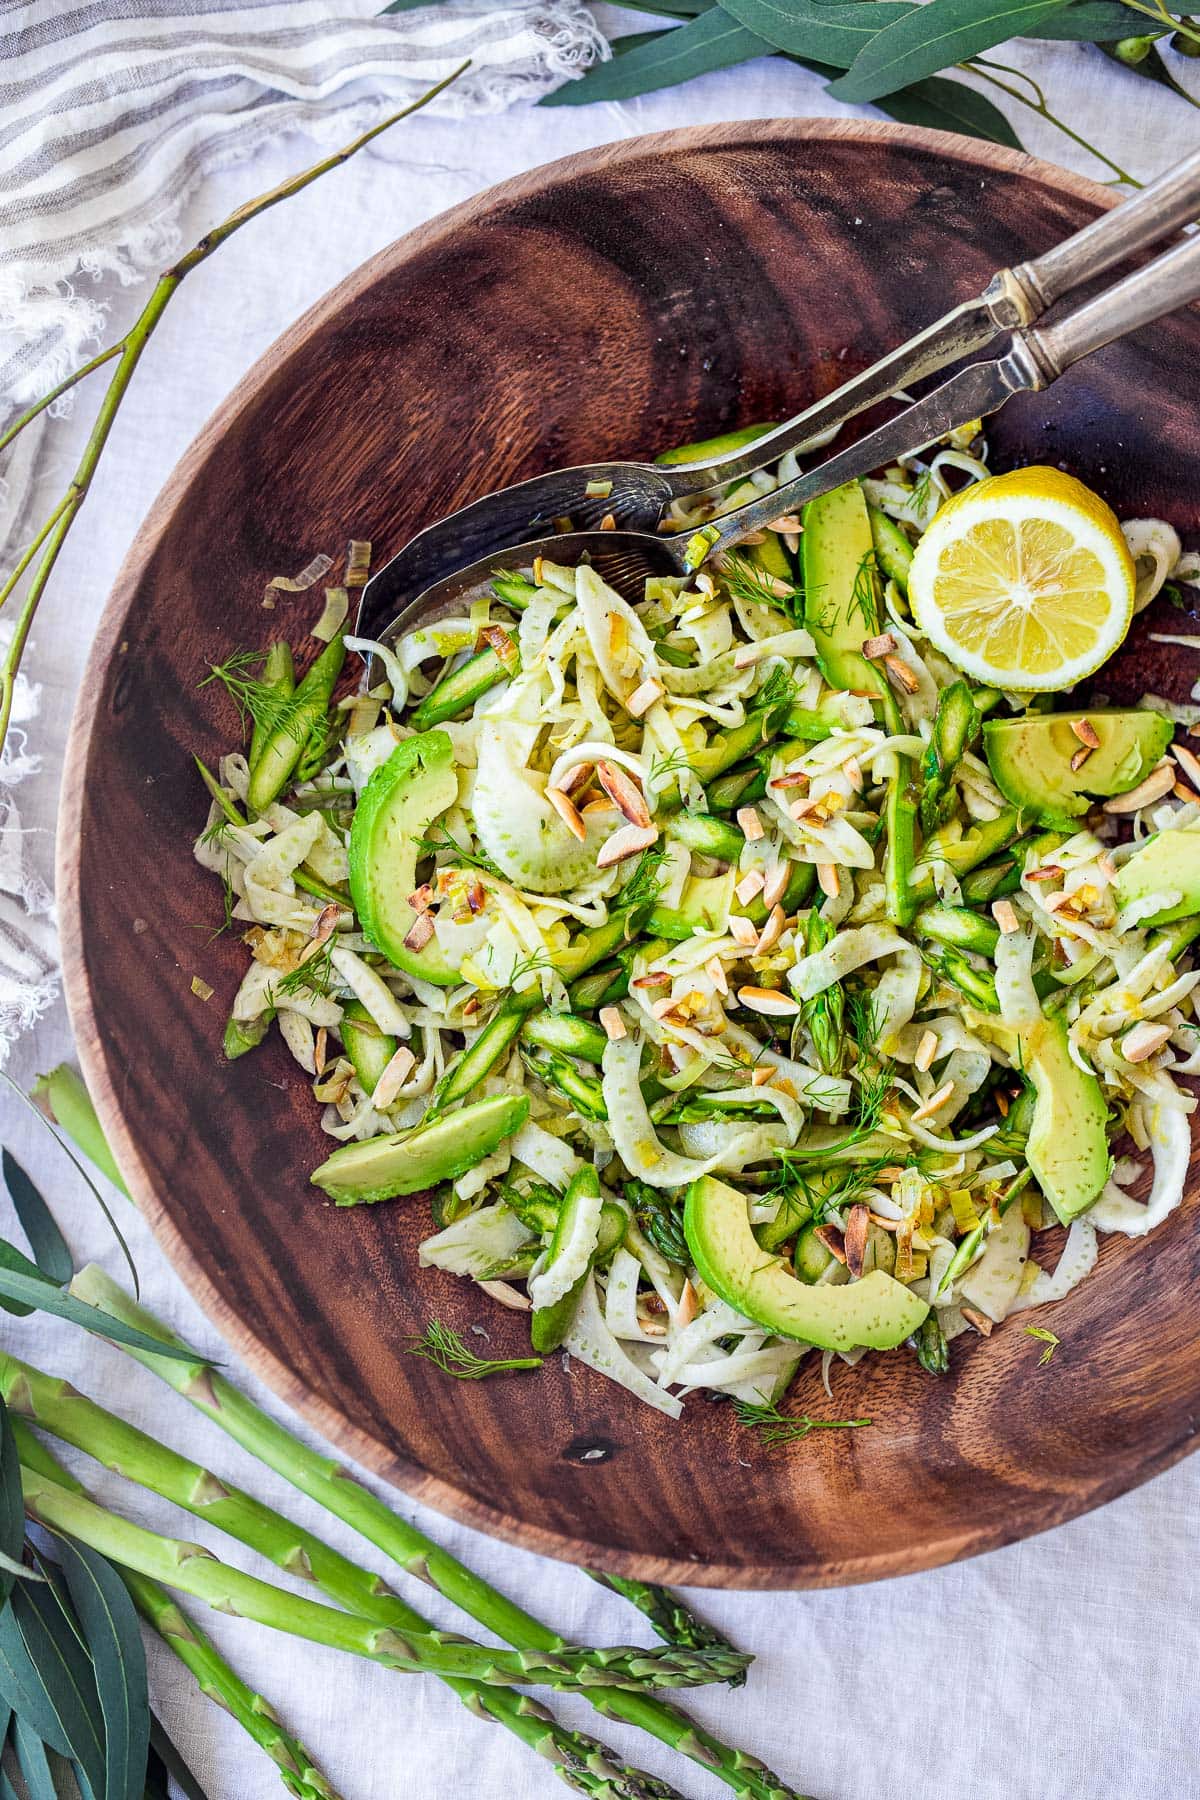 One of our favorite spring salads, this Asparagus Salad is made with shaved raw asparagus and fennel bulb, avocado, and toasted, slivered almonds, tossed in the most delicious Lemony Leek Dressing.